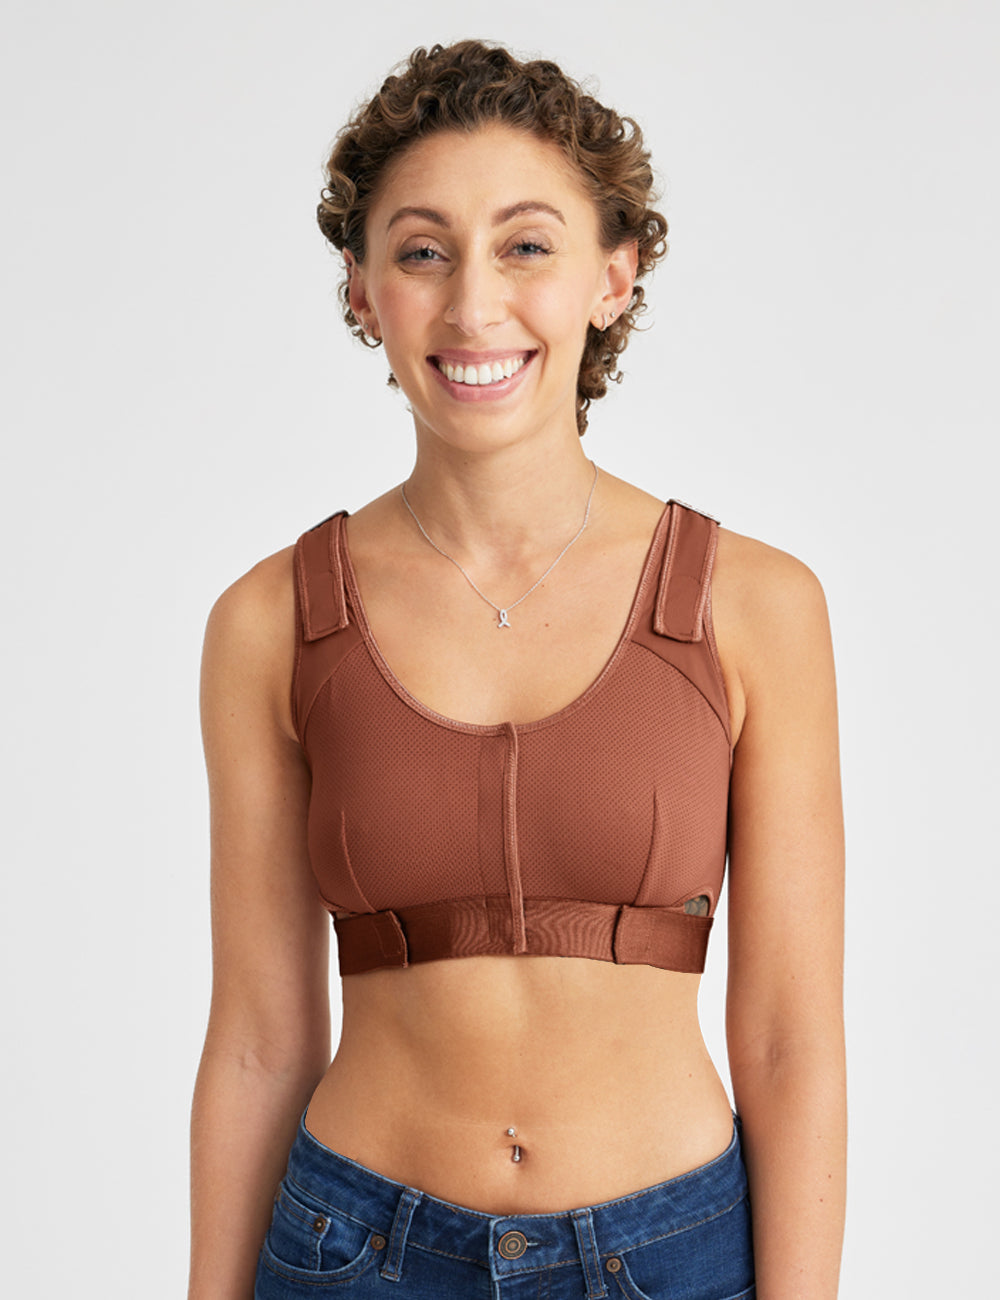 Surgical recovery brassiere - Eureka